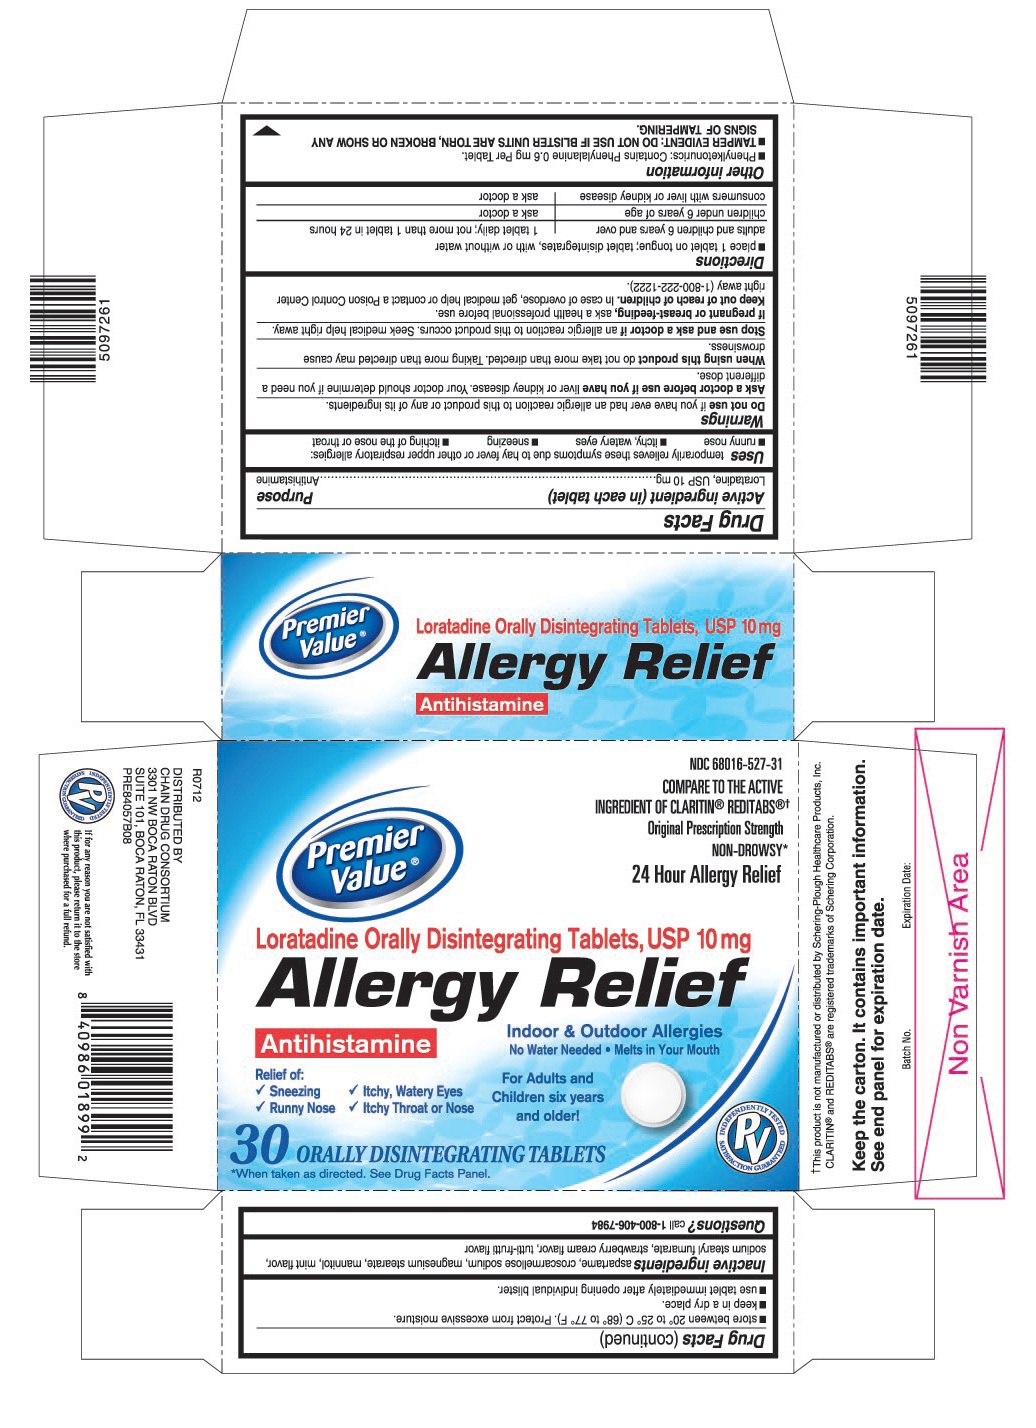 This is the 30 count blister carton label for Premier Value Loratadine ODT, USP 10 mg.